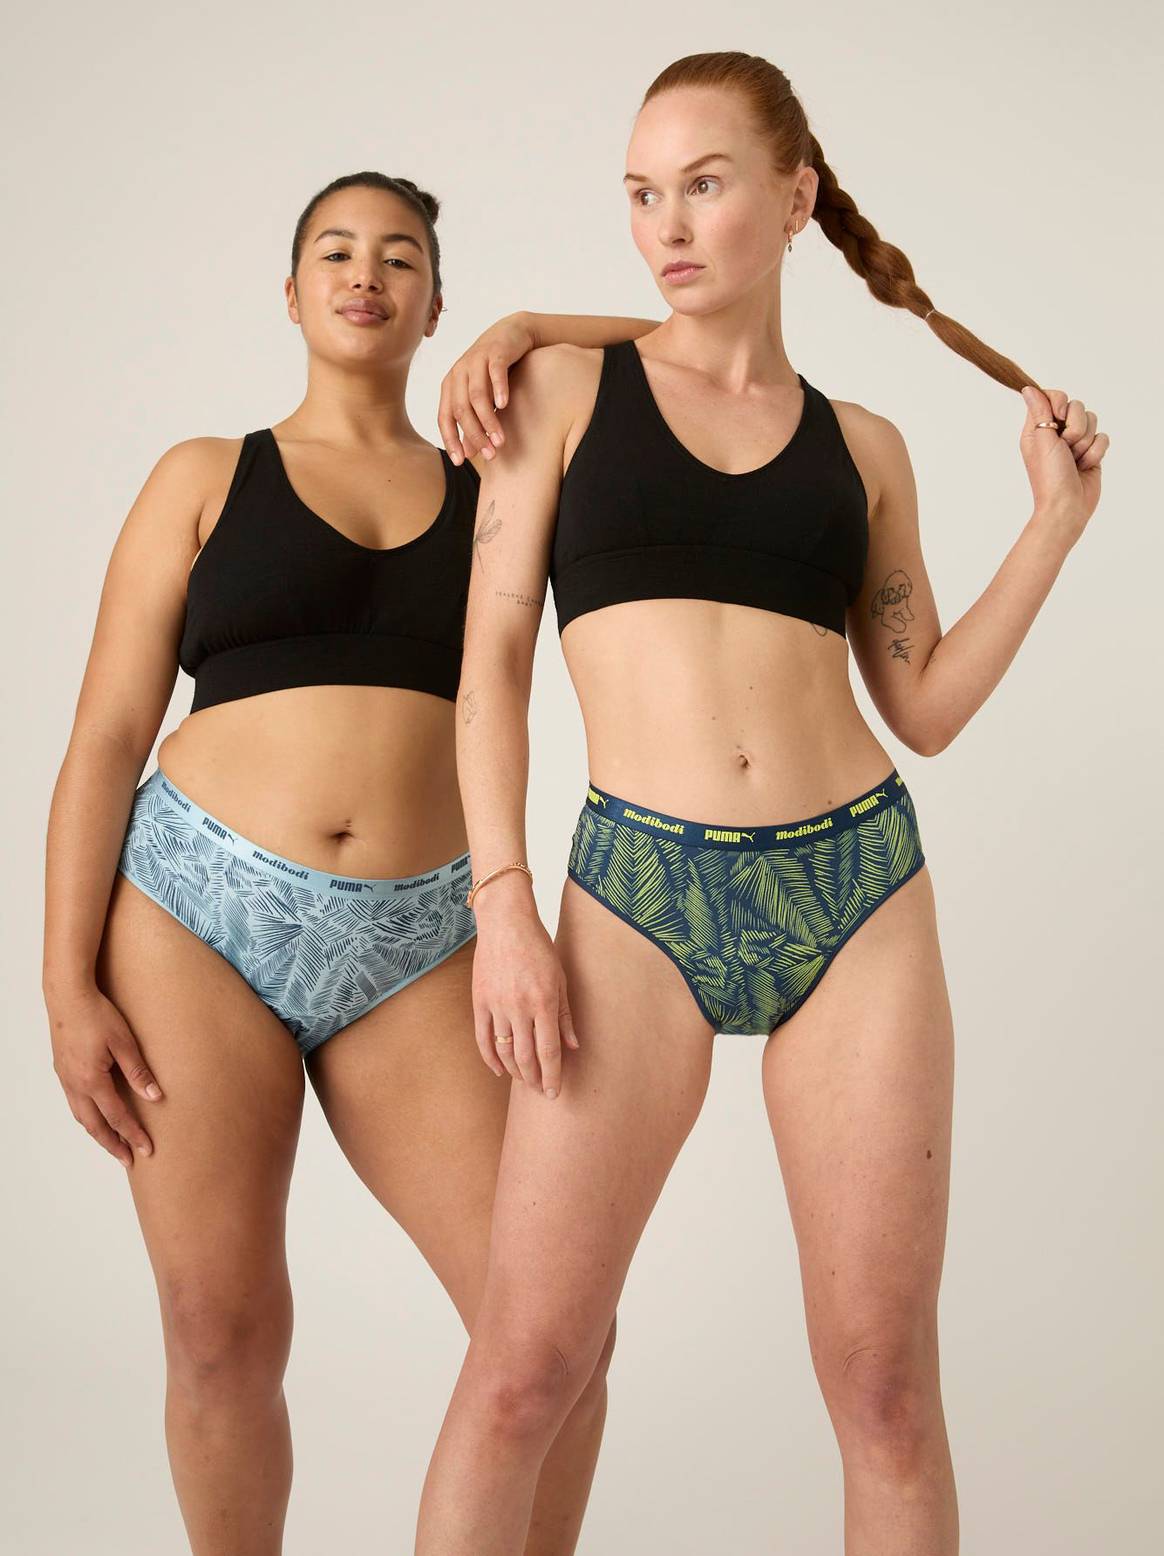 Modibodi: On offsets and building a sustainable underwear brand